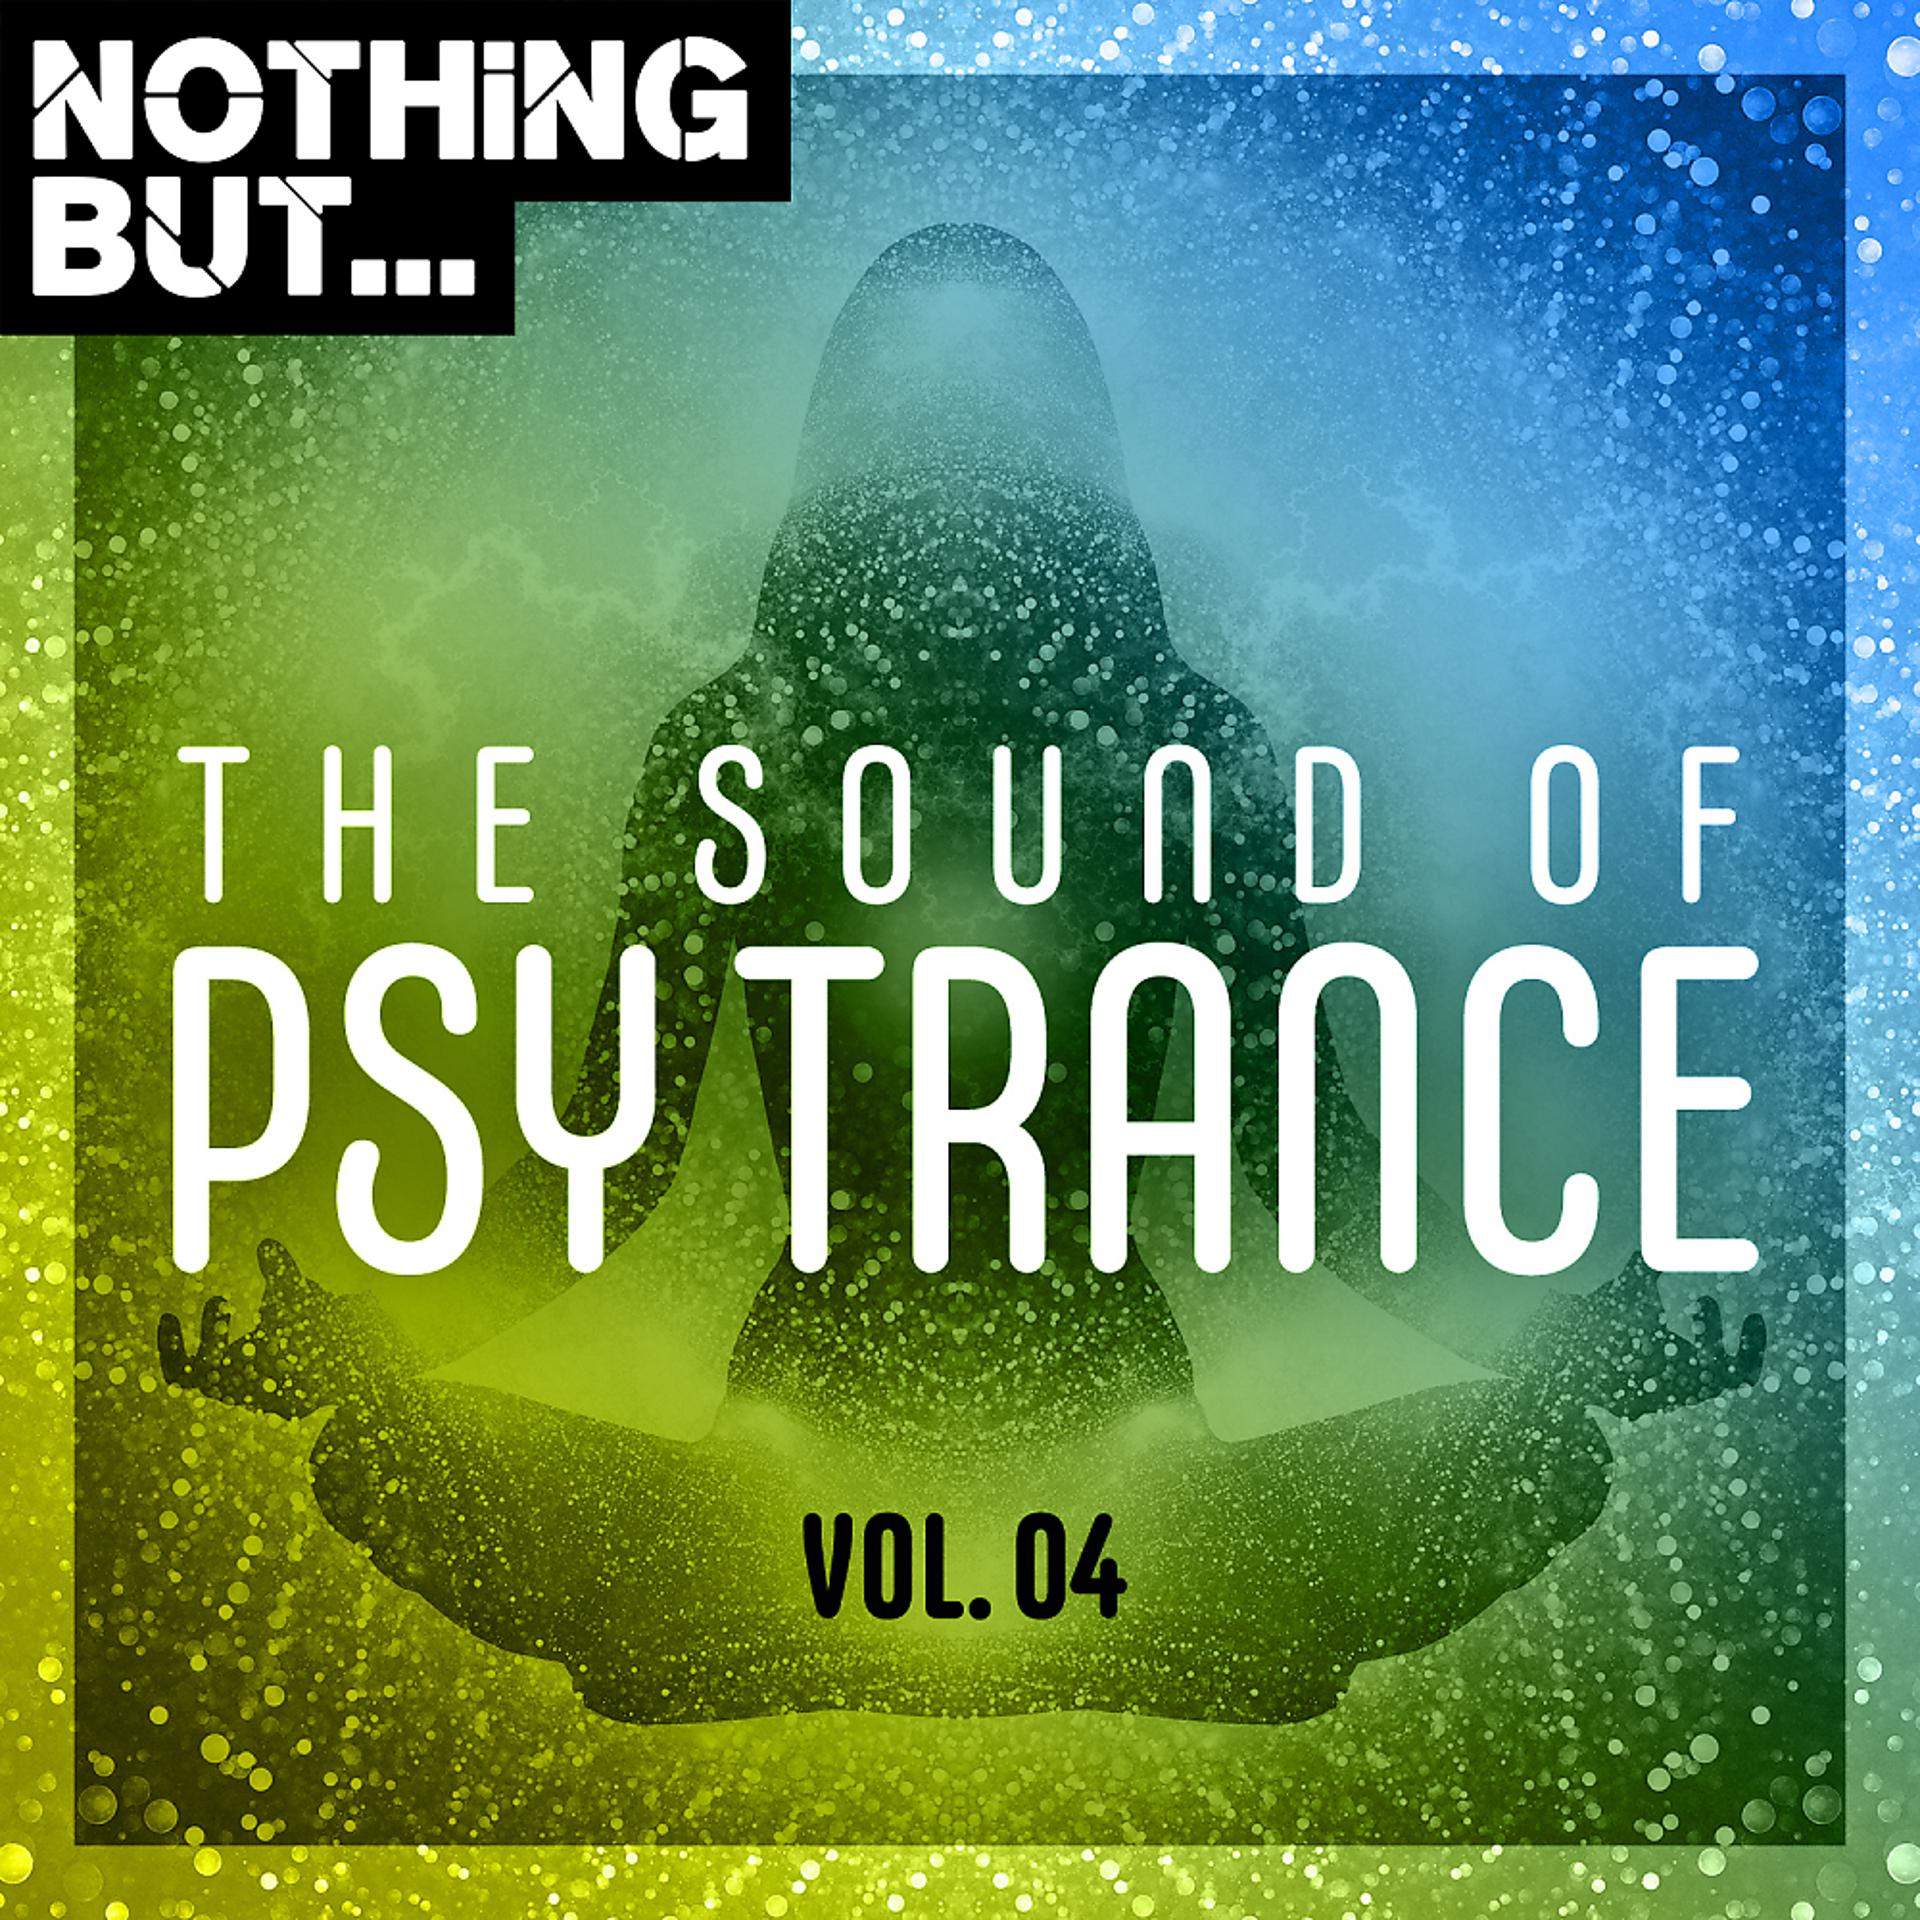 Постер альбома Nothing But... The Sound of Psy Trance, Vol. 04